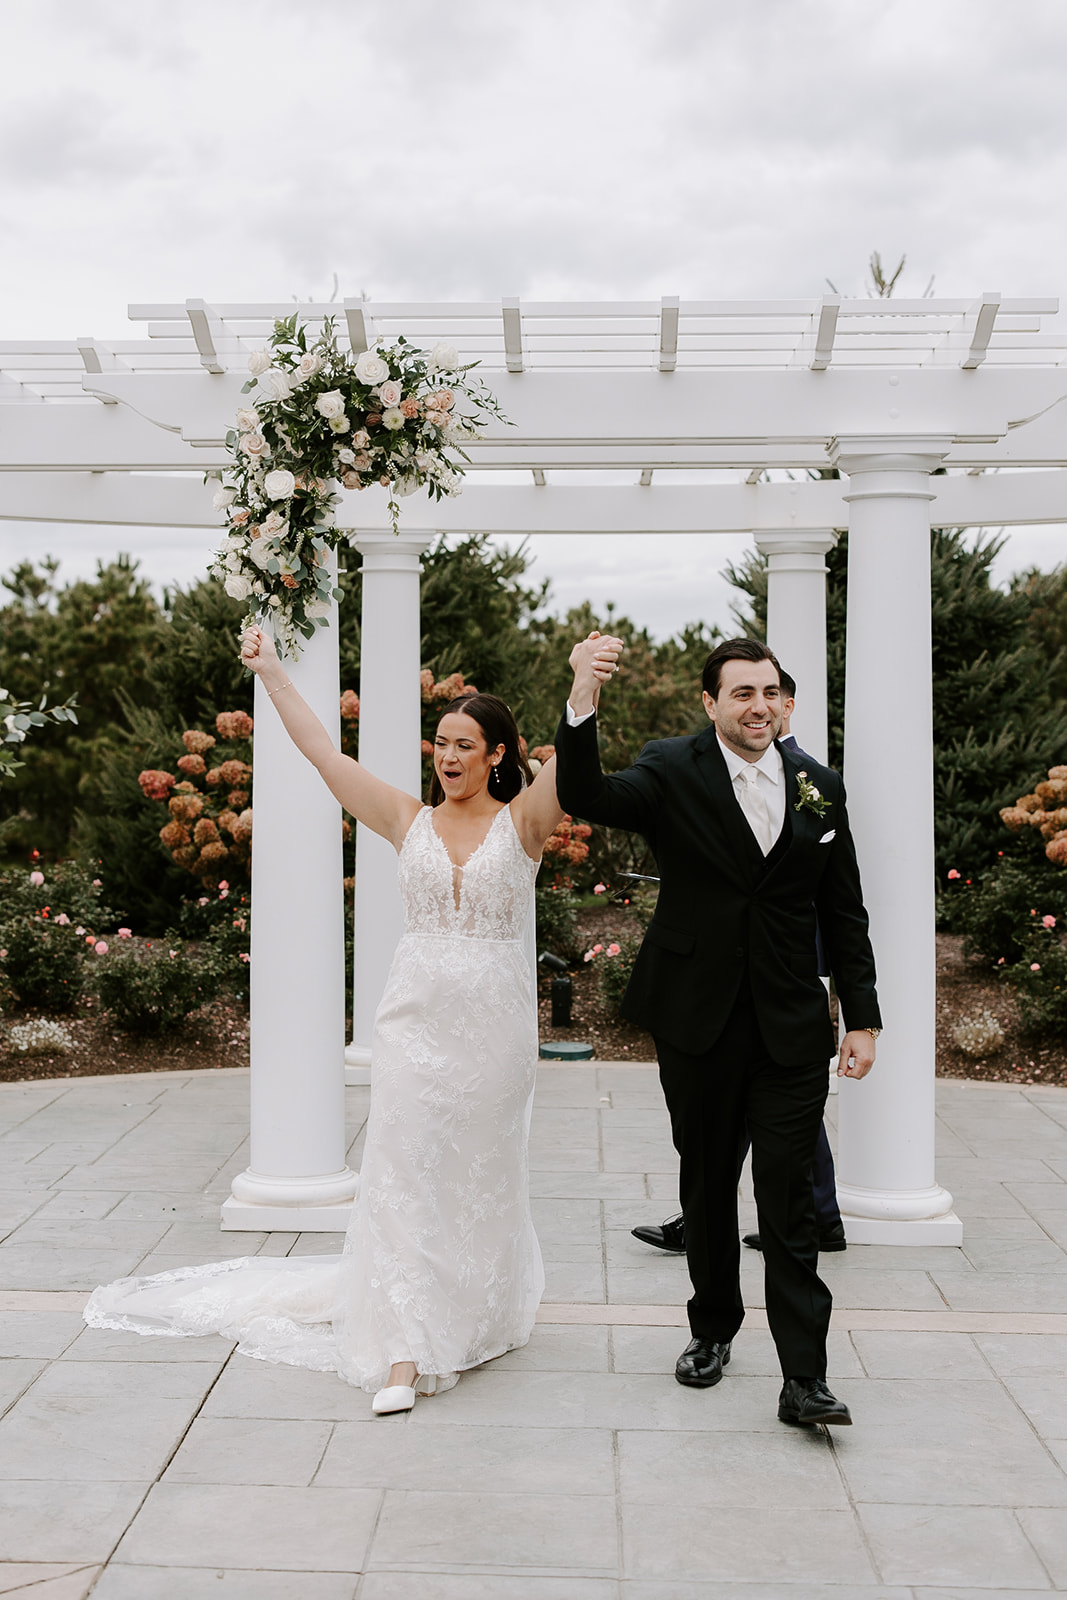 Stunning bride and groom exit their perfect New England